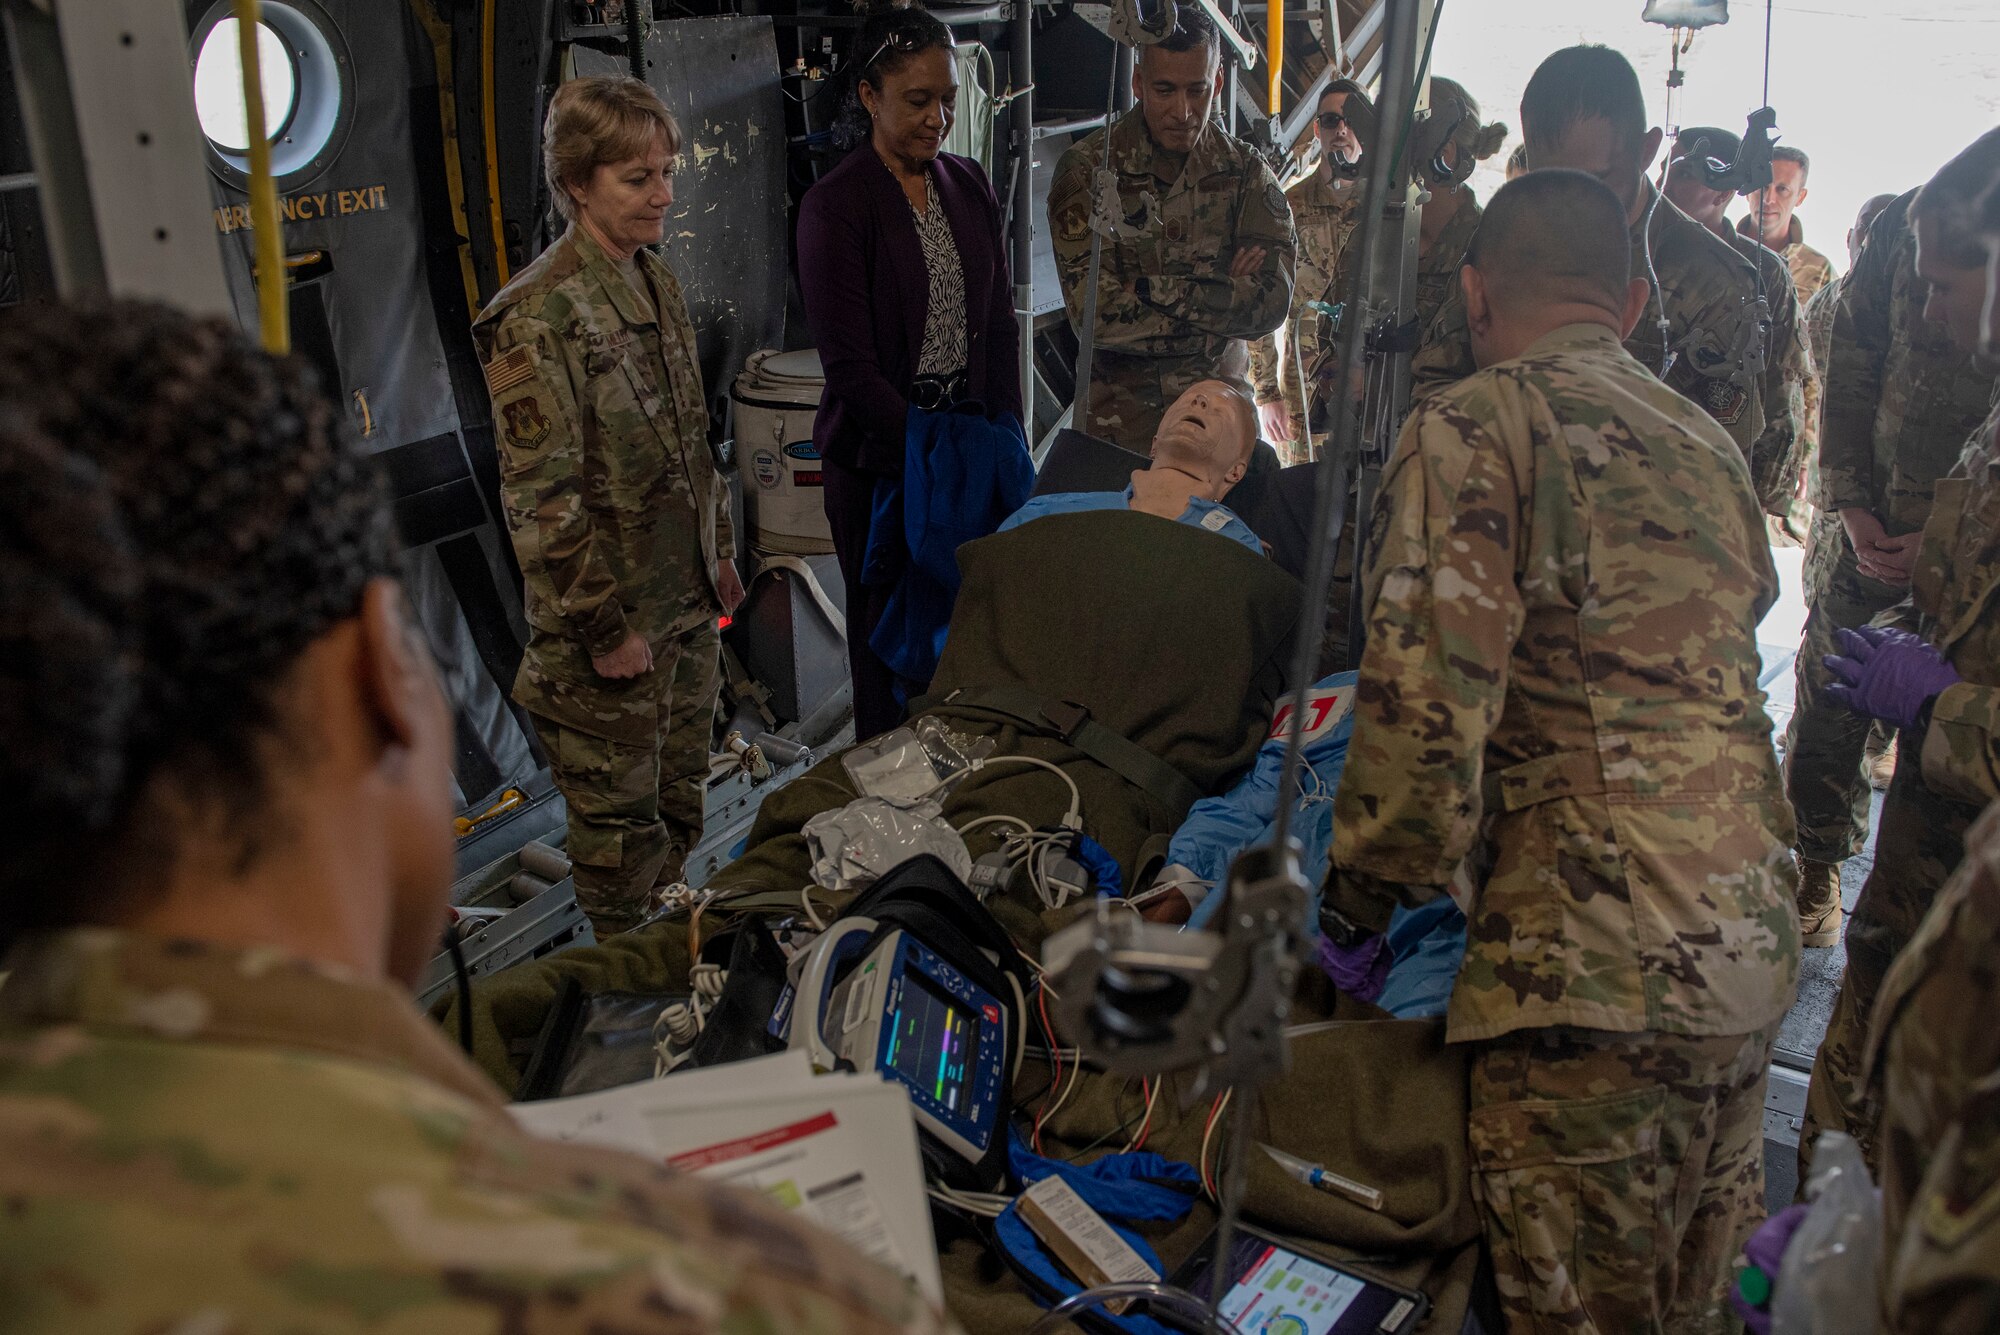 Gen. Maryanne Miller, Air Mobility Command commander, and Chief Master Sgt. Terrence Greene, AMC command chief, observe as members of the 375th Aeromedical Squadron treat a simulated patient suffering from ventricular tachycardia without pulse on board the Fuselage Trainer (FuT) at Scott Air Force Base, Ill., Nov. 18, 2019.